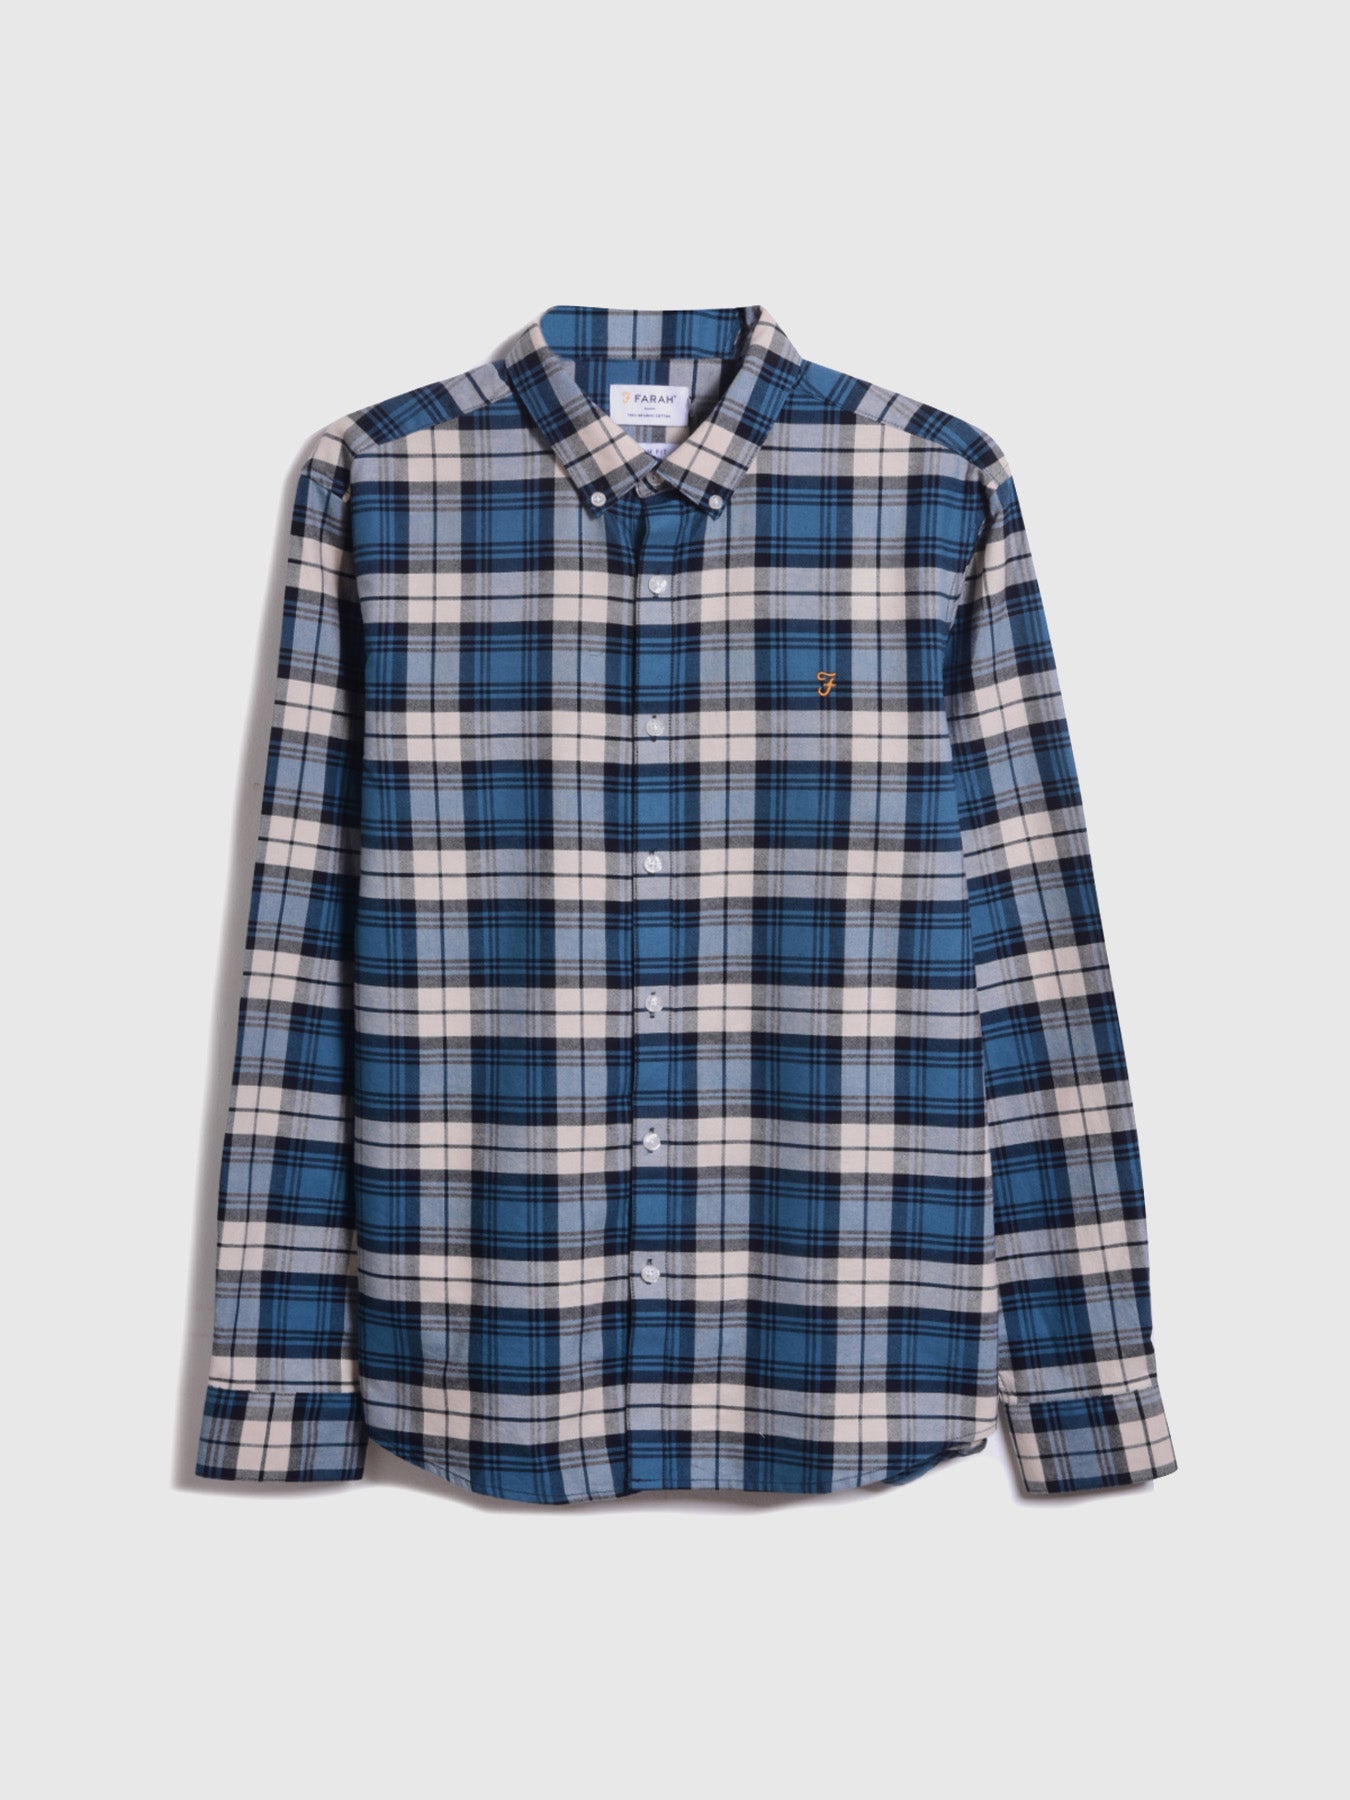 View Brewer Slim Fit Organic Cotton Check Shirt In Fog information